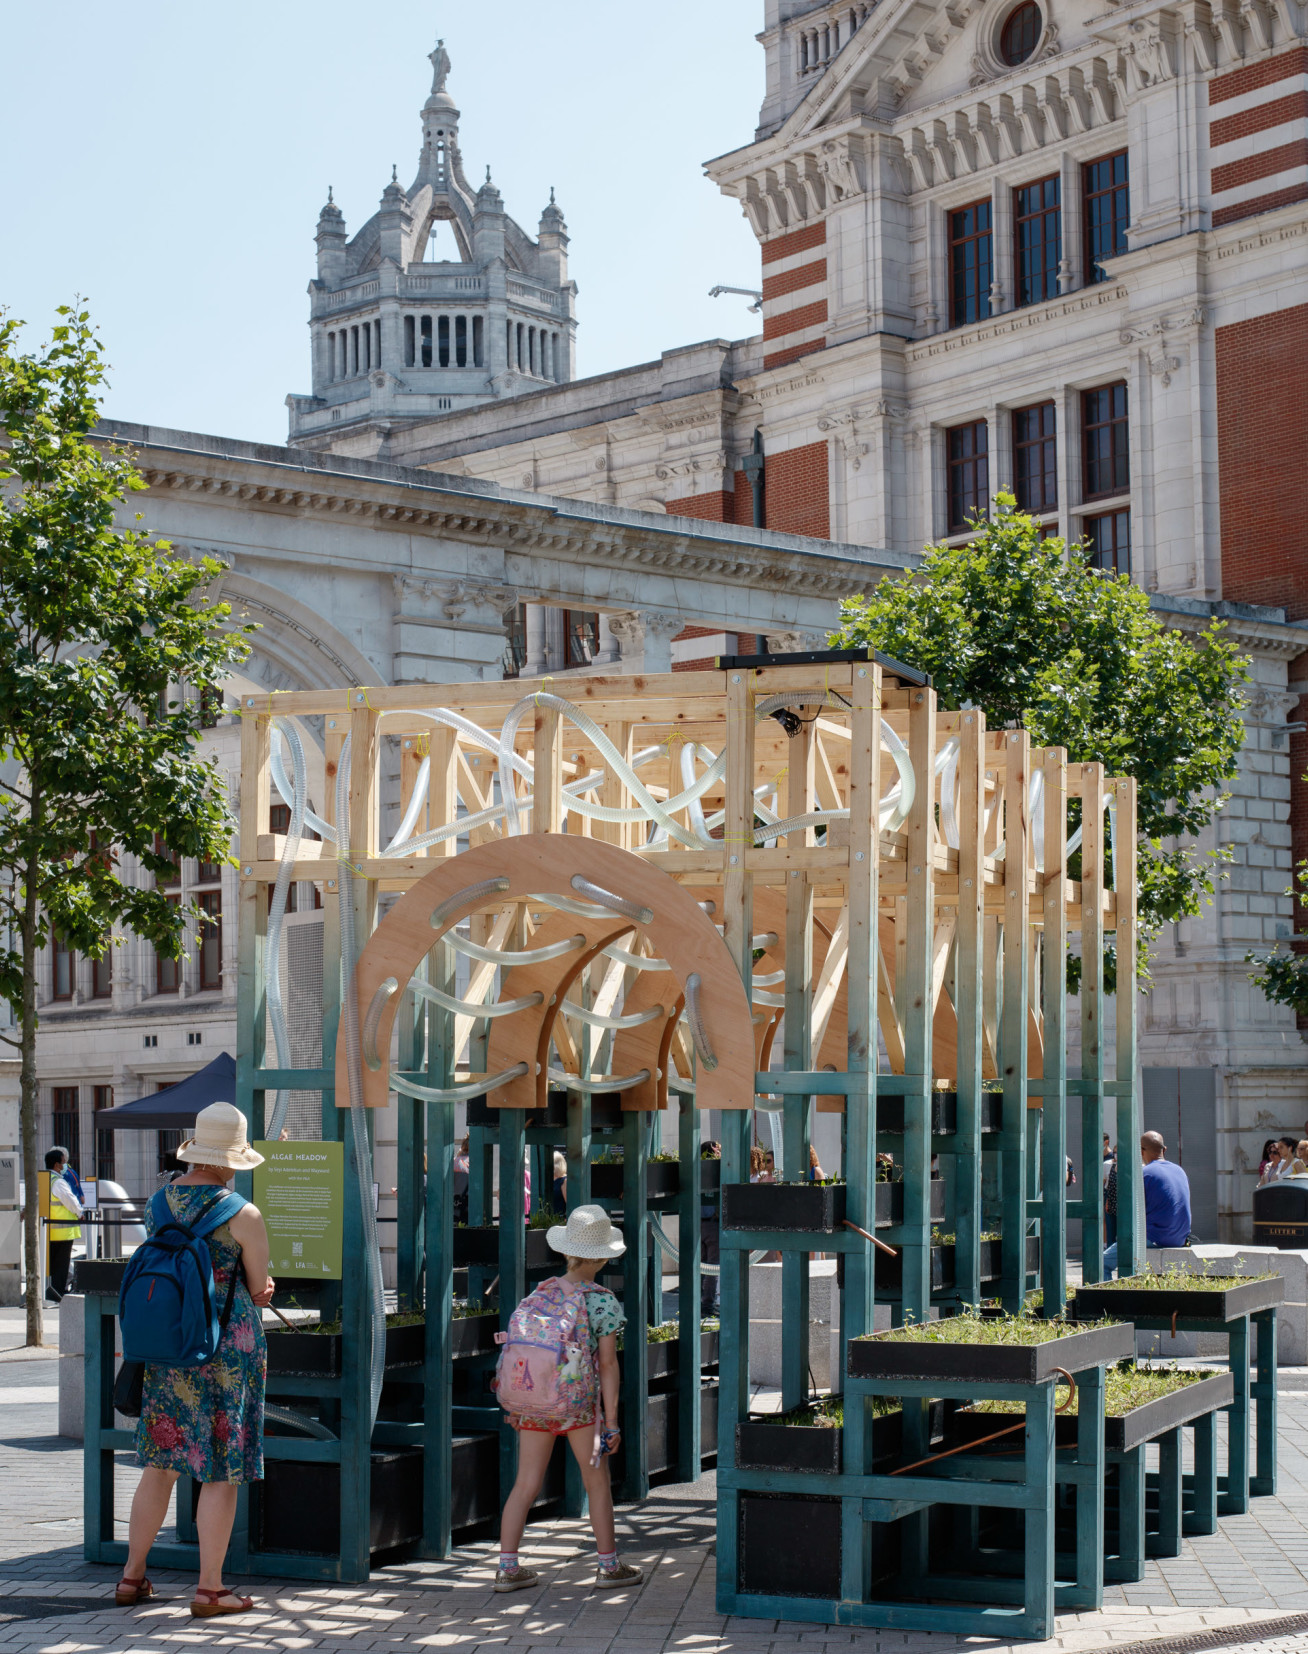 The Home Away from Hive installation, a wooden structure on Exhibition Road (Credit: Luke O'Donovan)